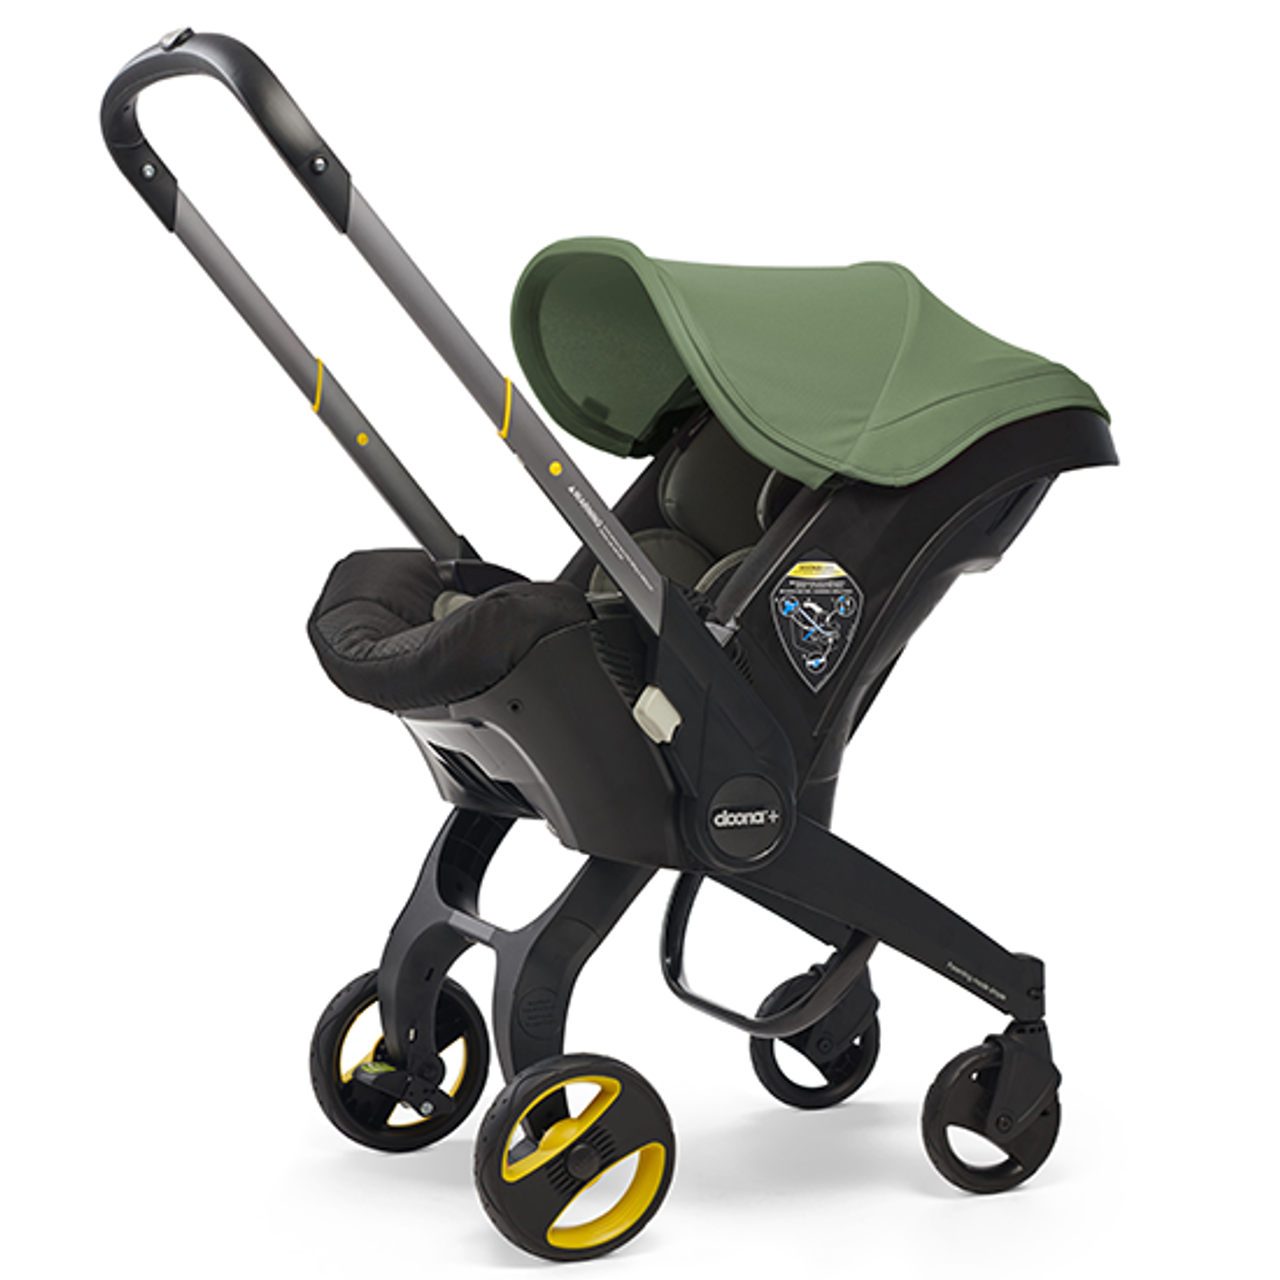 Doona Car Seat and Stroller Full Review